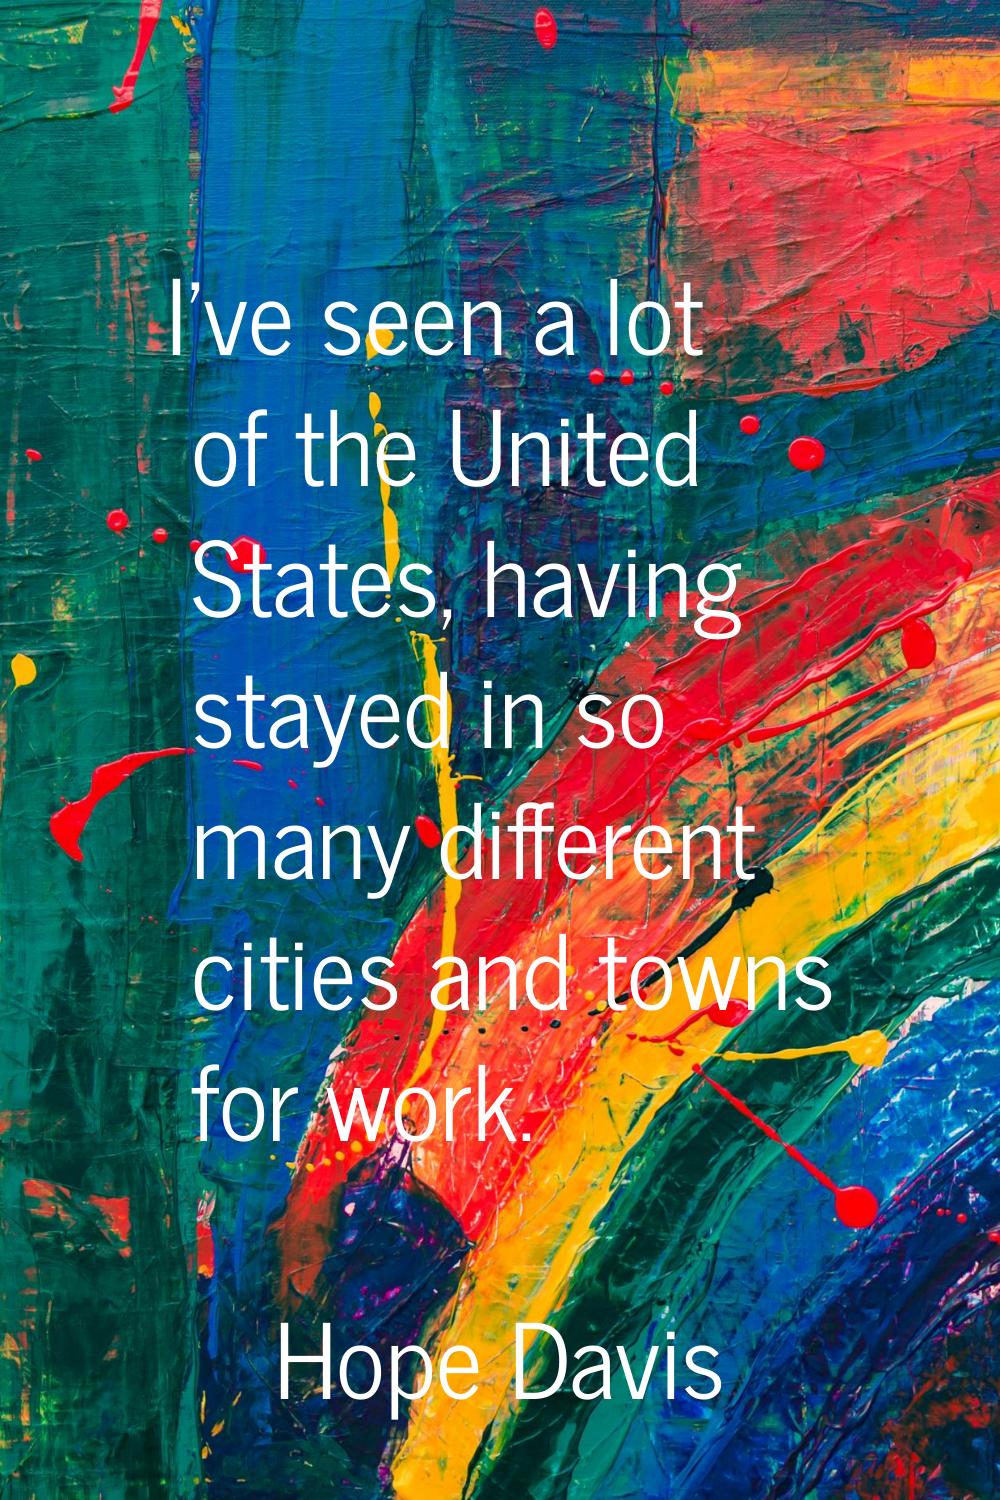 I've seen a lot of the United States, having stayed in so many different cities and towns for work.